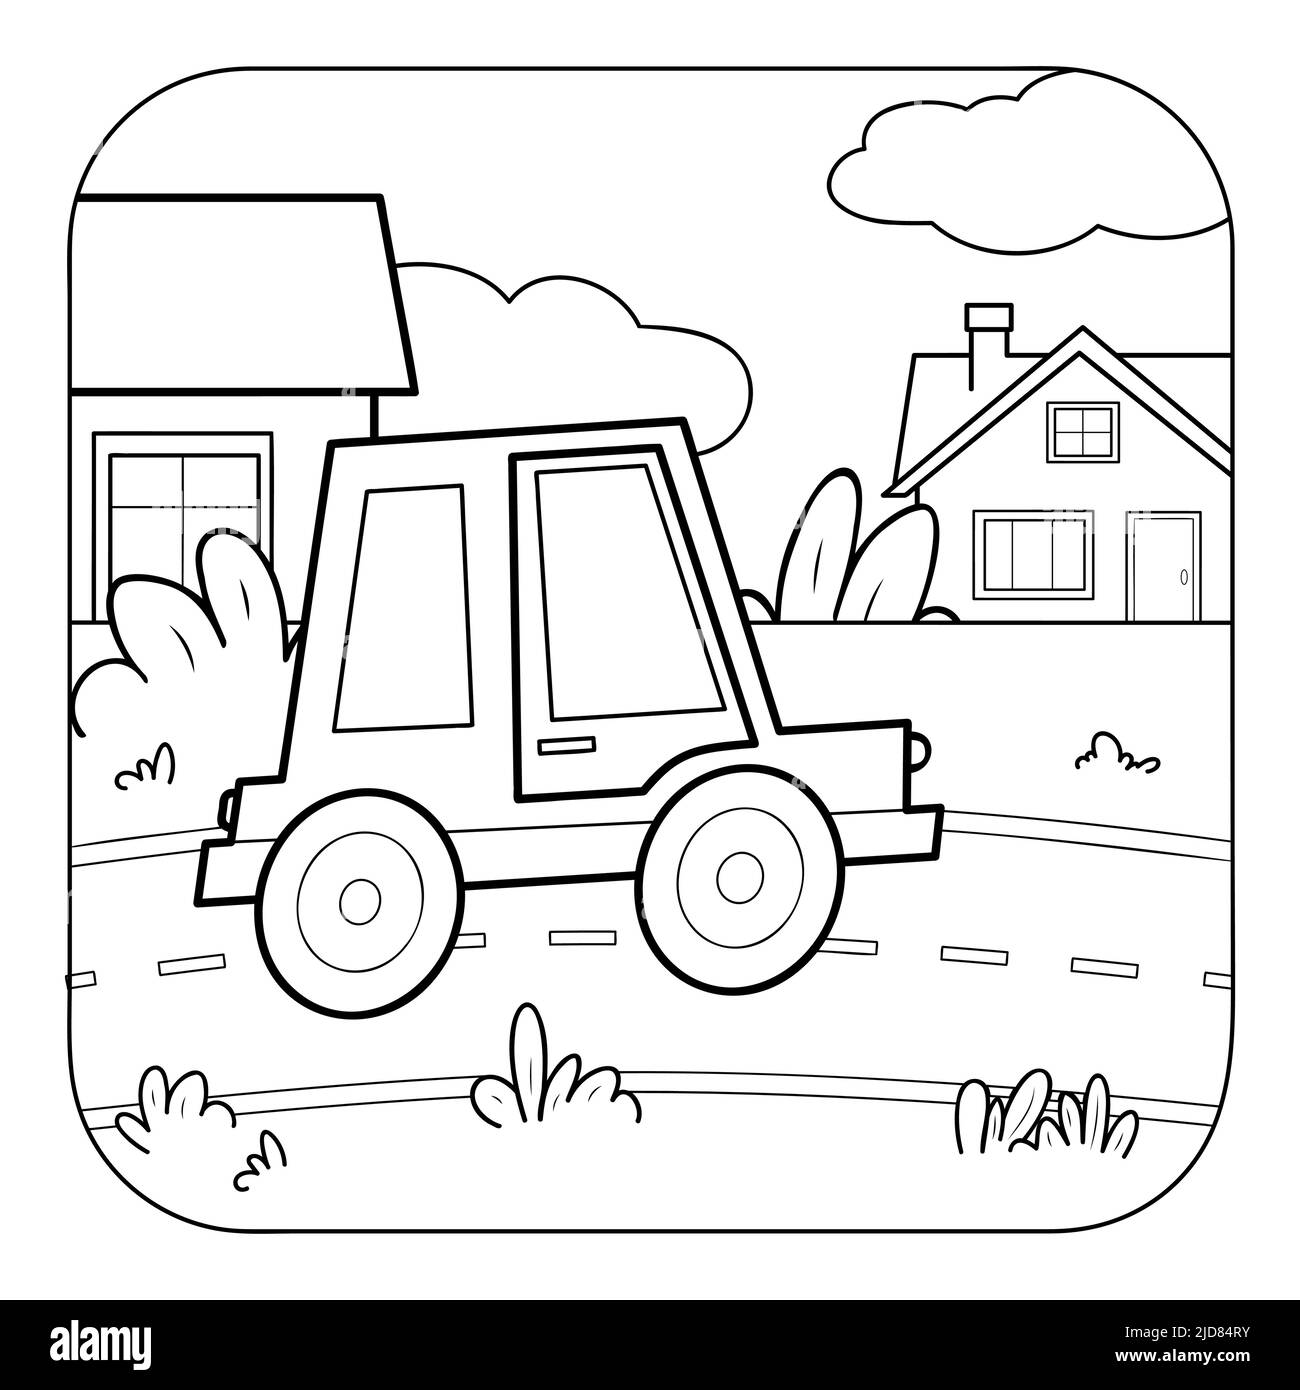 Car sketch. Vector illustration in black and white. Coloring paper, page,  book.Car contour. Children's coloring book, color book. Silhouette car.  Truck outline Stock Vector